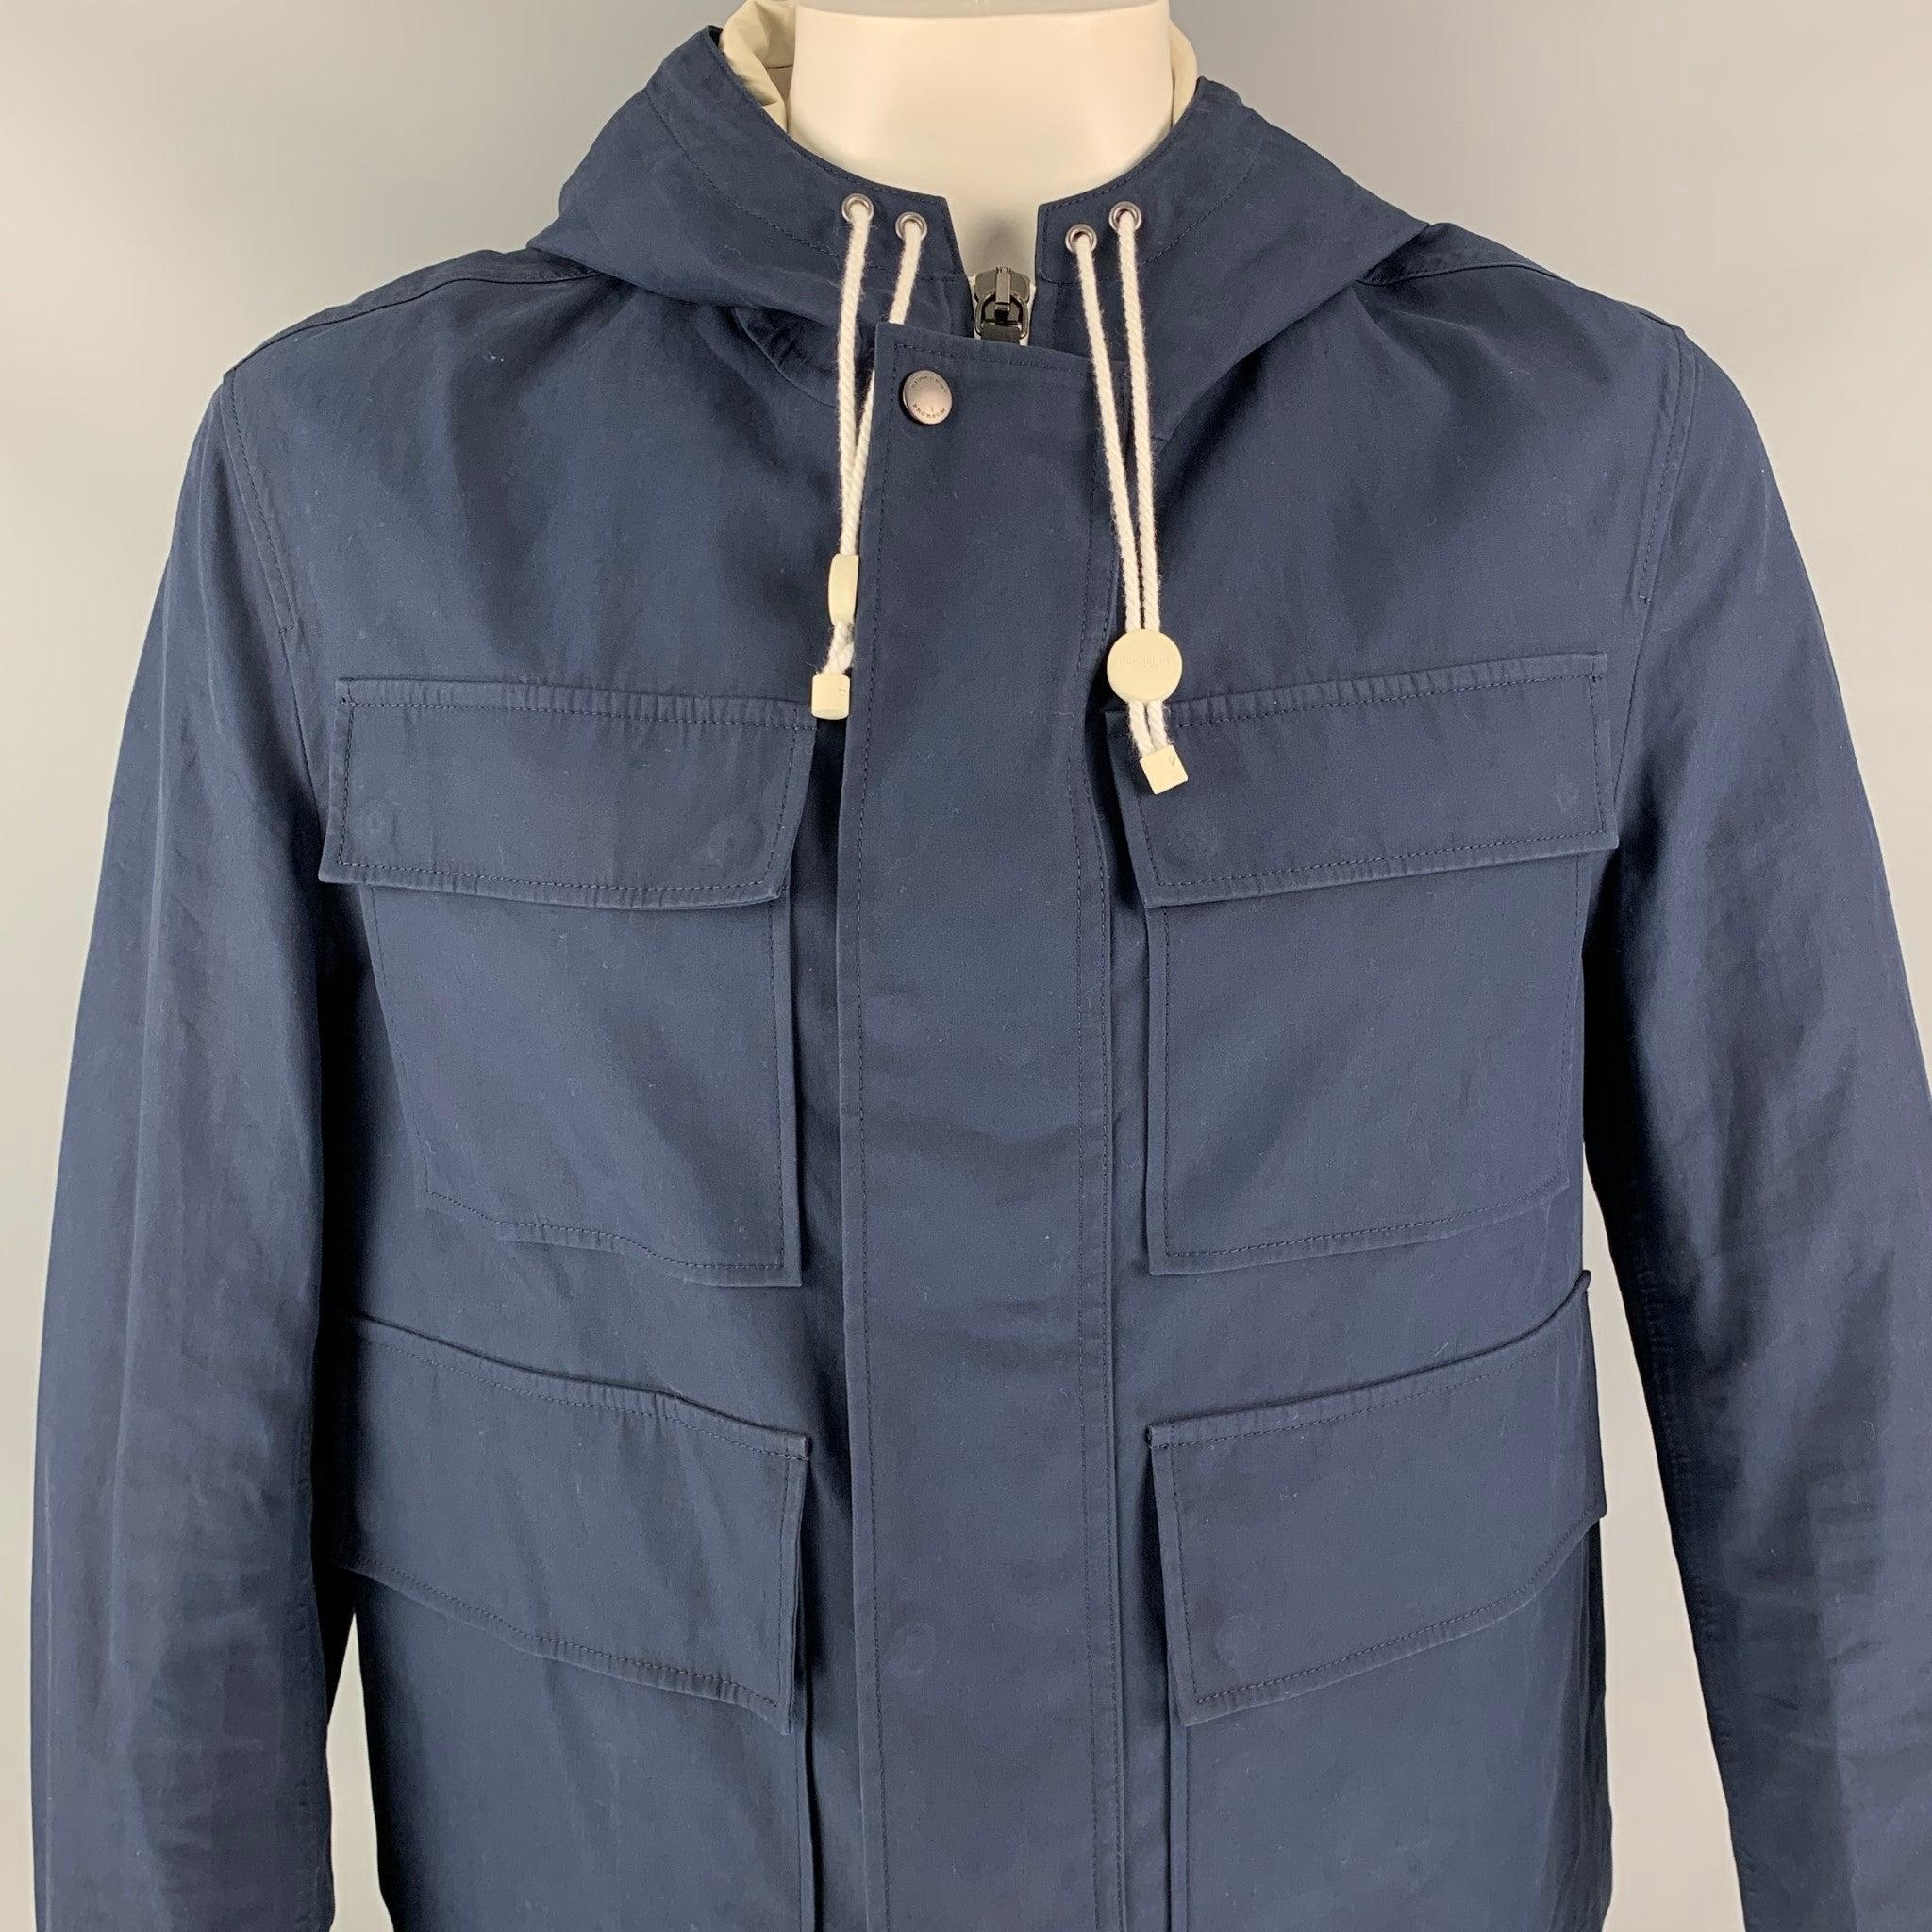 Black BURBERRY PRORSUM Spring 2014 Size 42 Navy Blue Coated Cotton Hooded Jacket